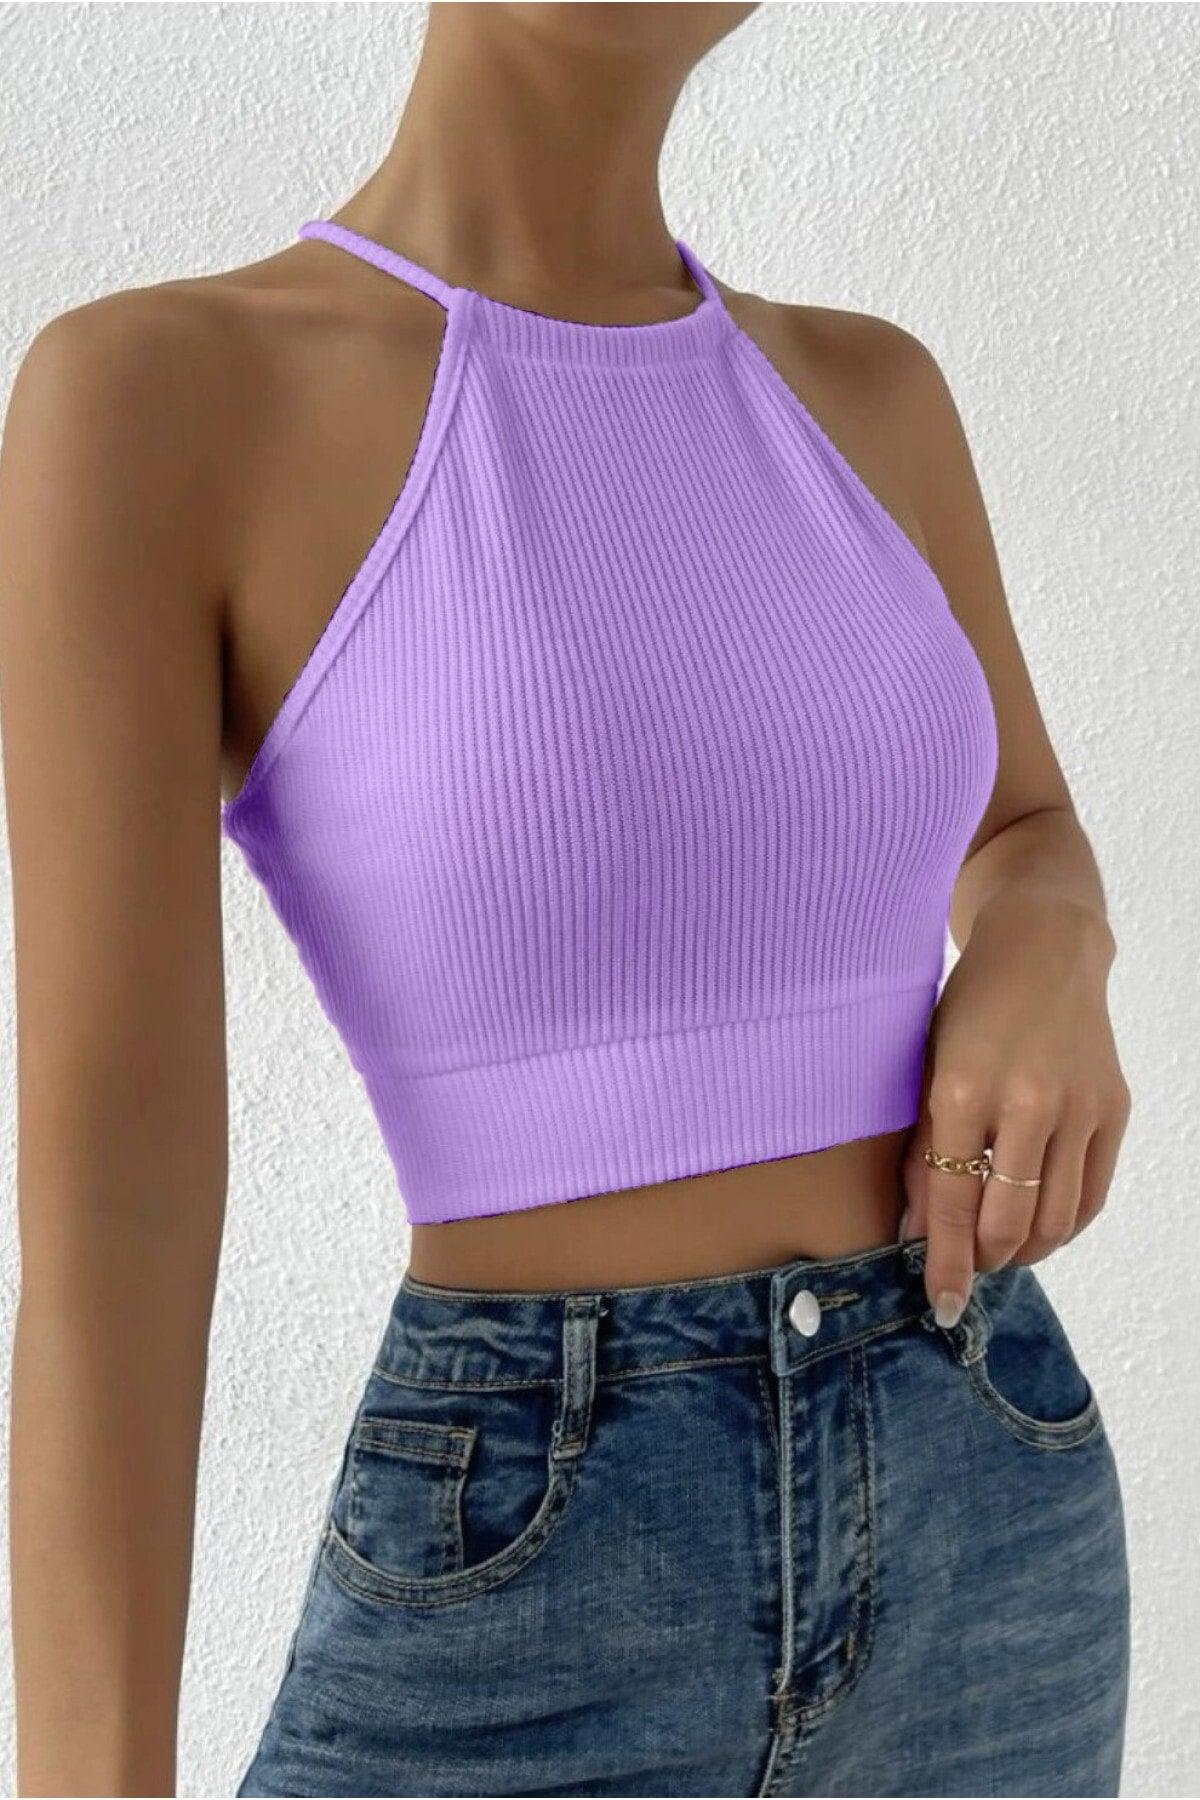 Women's Lilac Camisole Backless Belted Crop Top Blouse - Swordslife